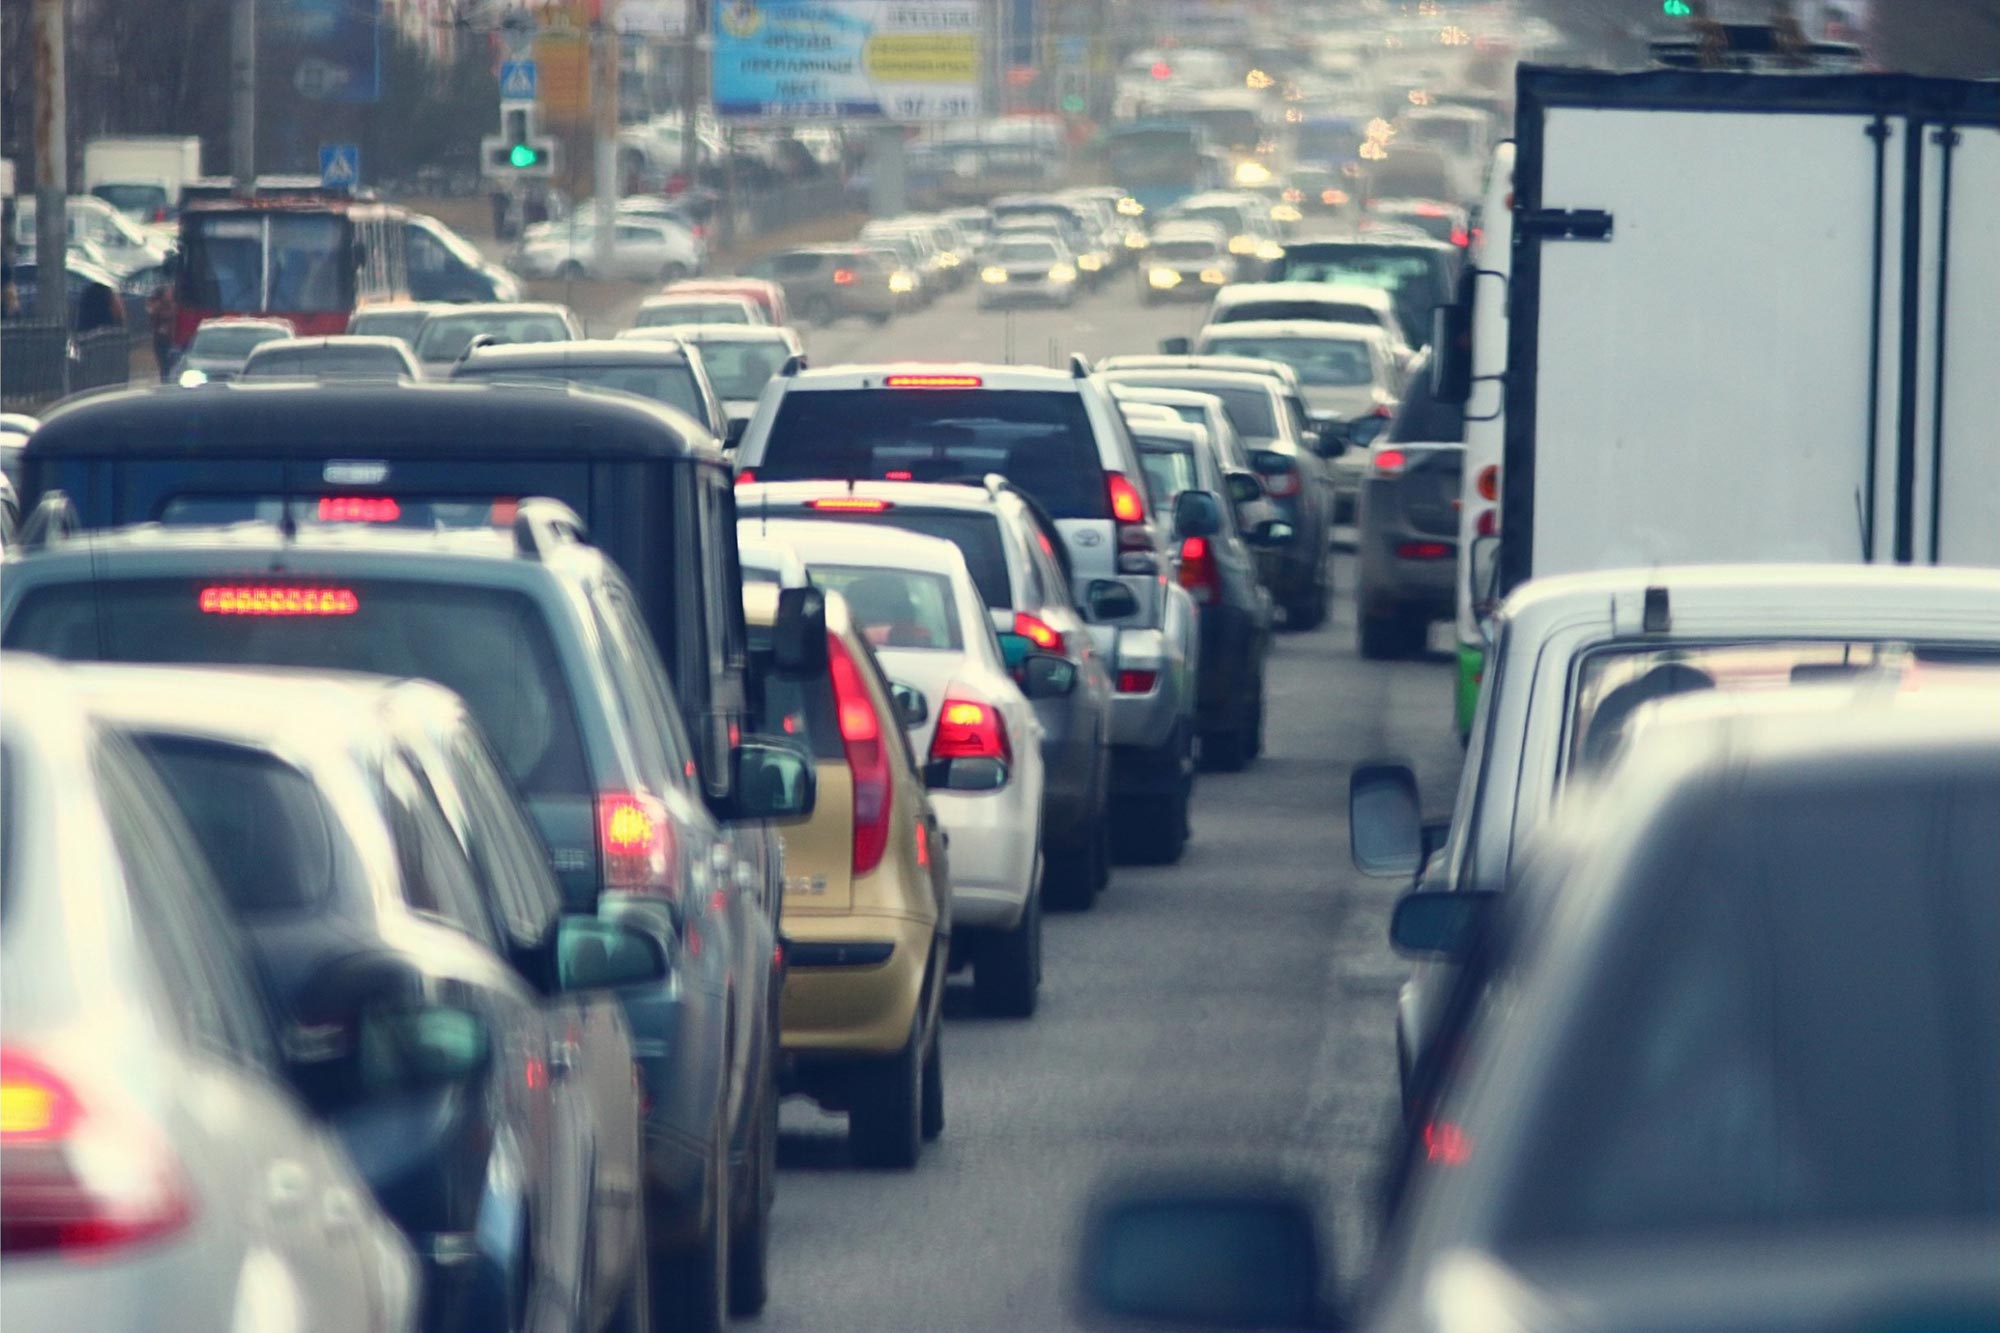 Traffic pollution is associated with an increased risk of dementia